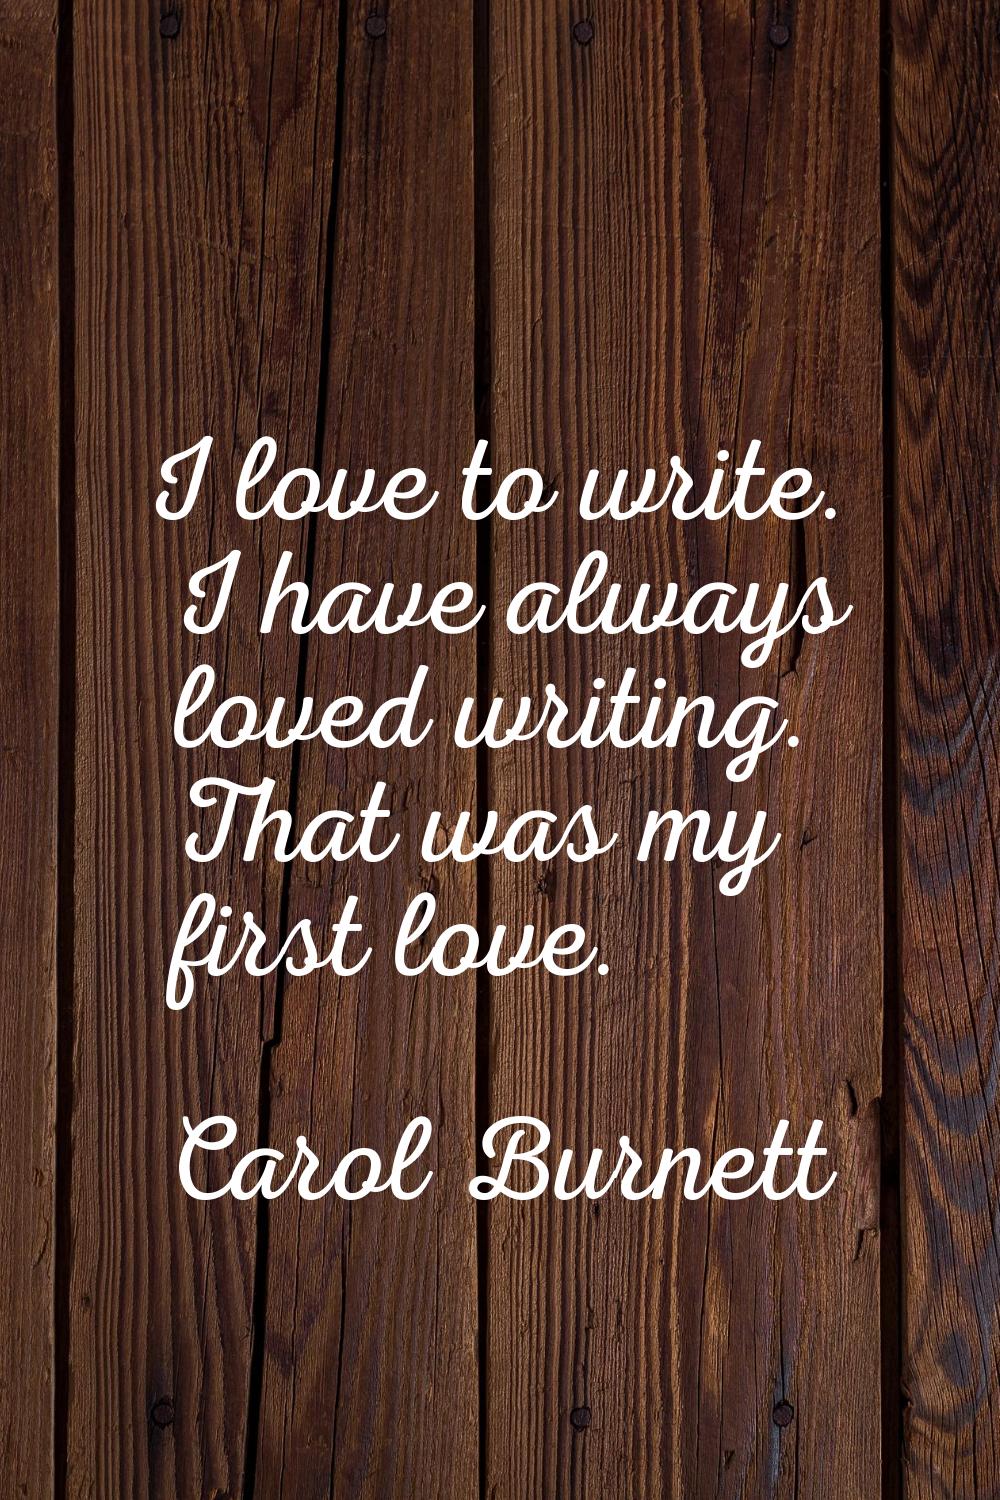 I love to write. I have always loved writing. That was my first love.